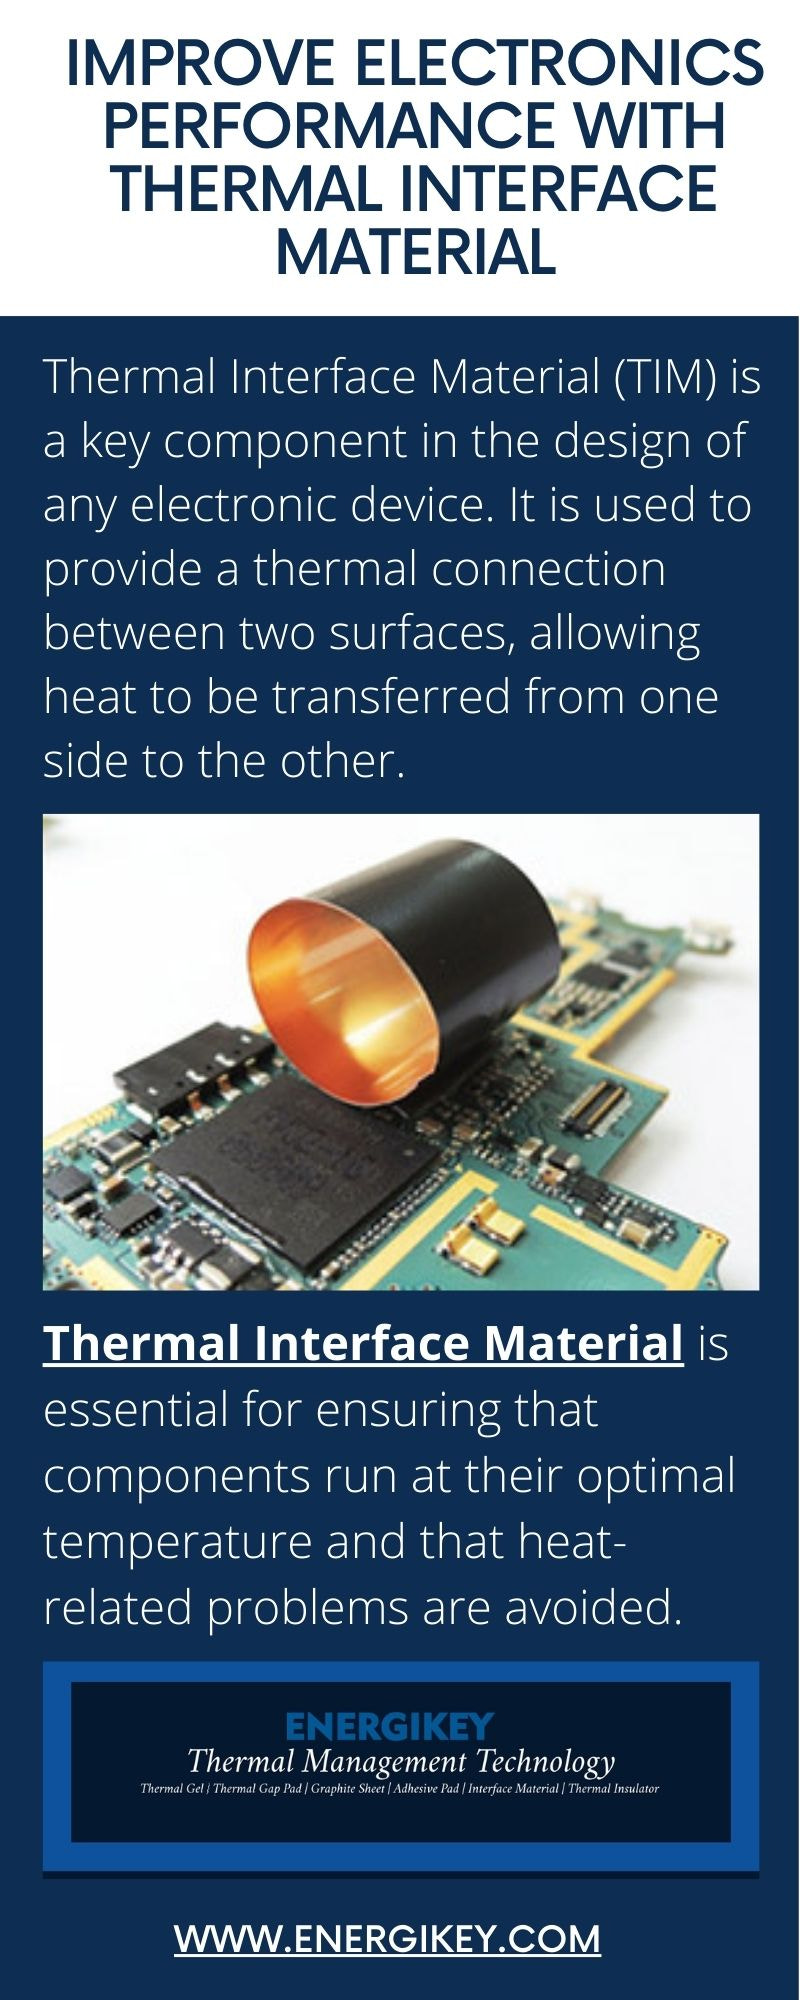 Improve Electronics Performance with Thermal Interface Material - 1